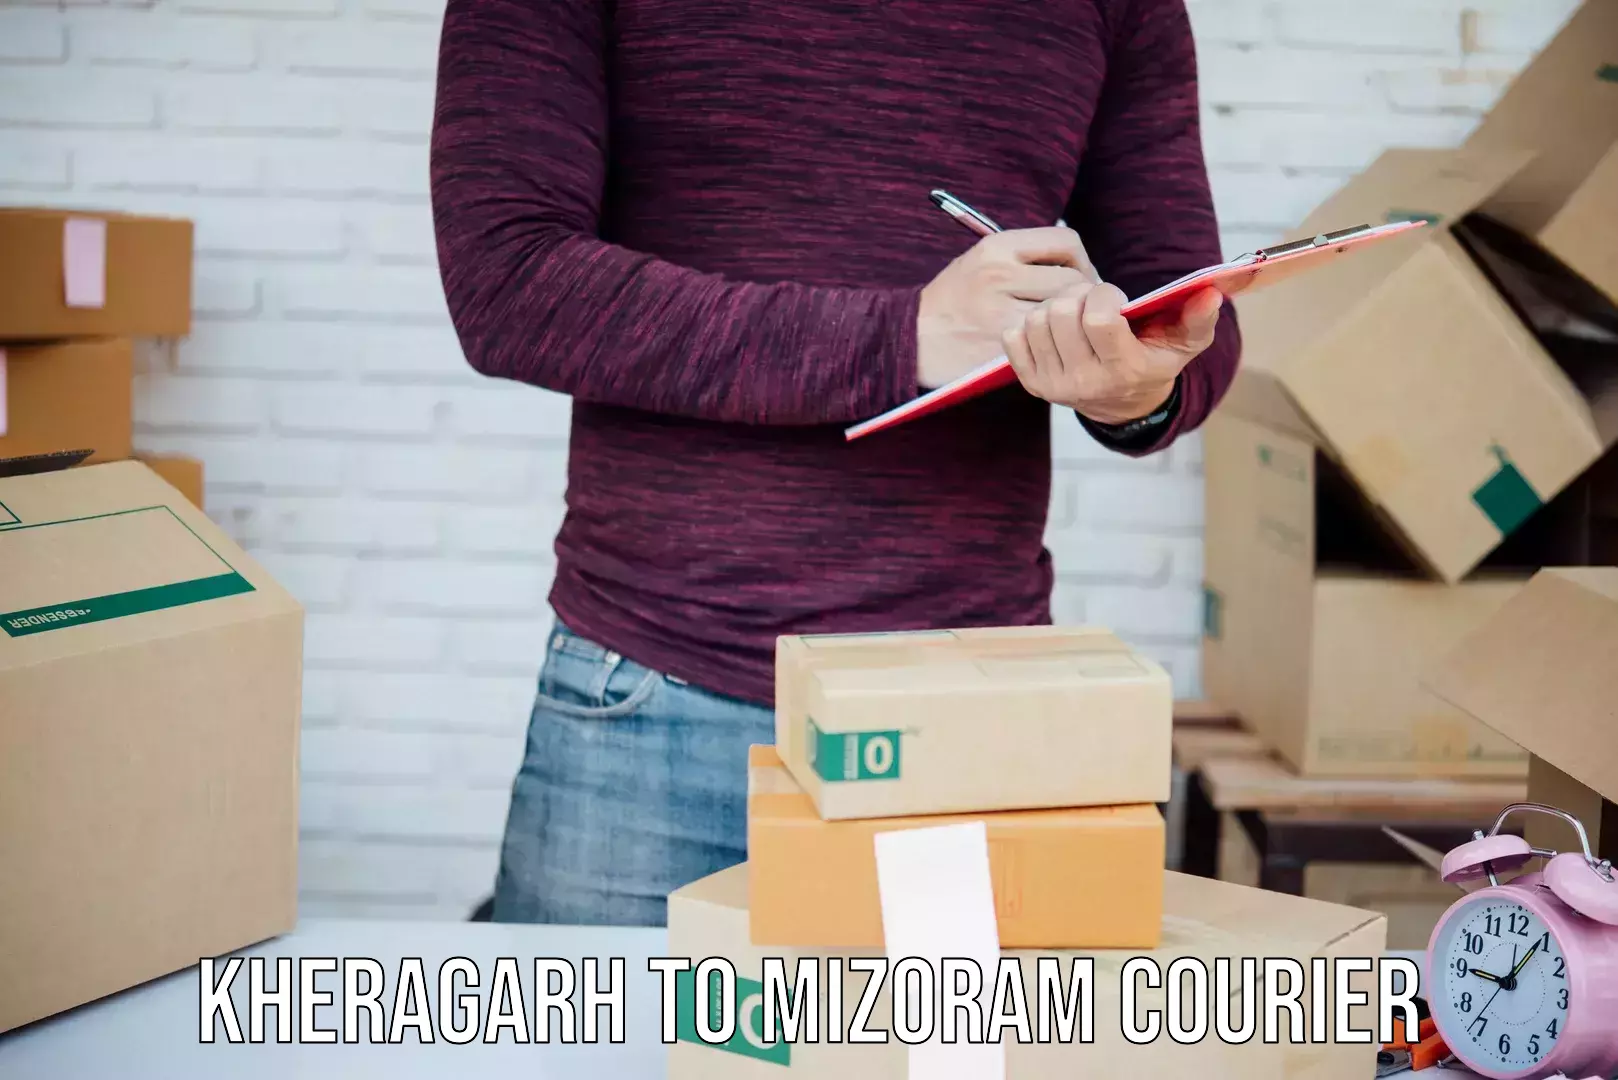 Advanced package delivery in Kheragarh to Mizoram